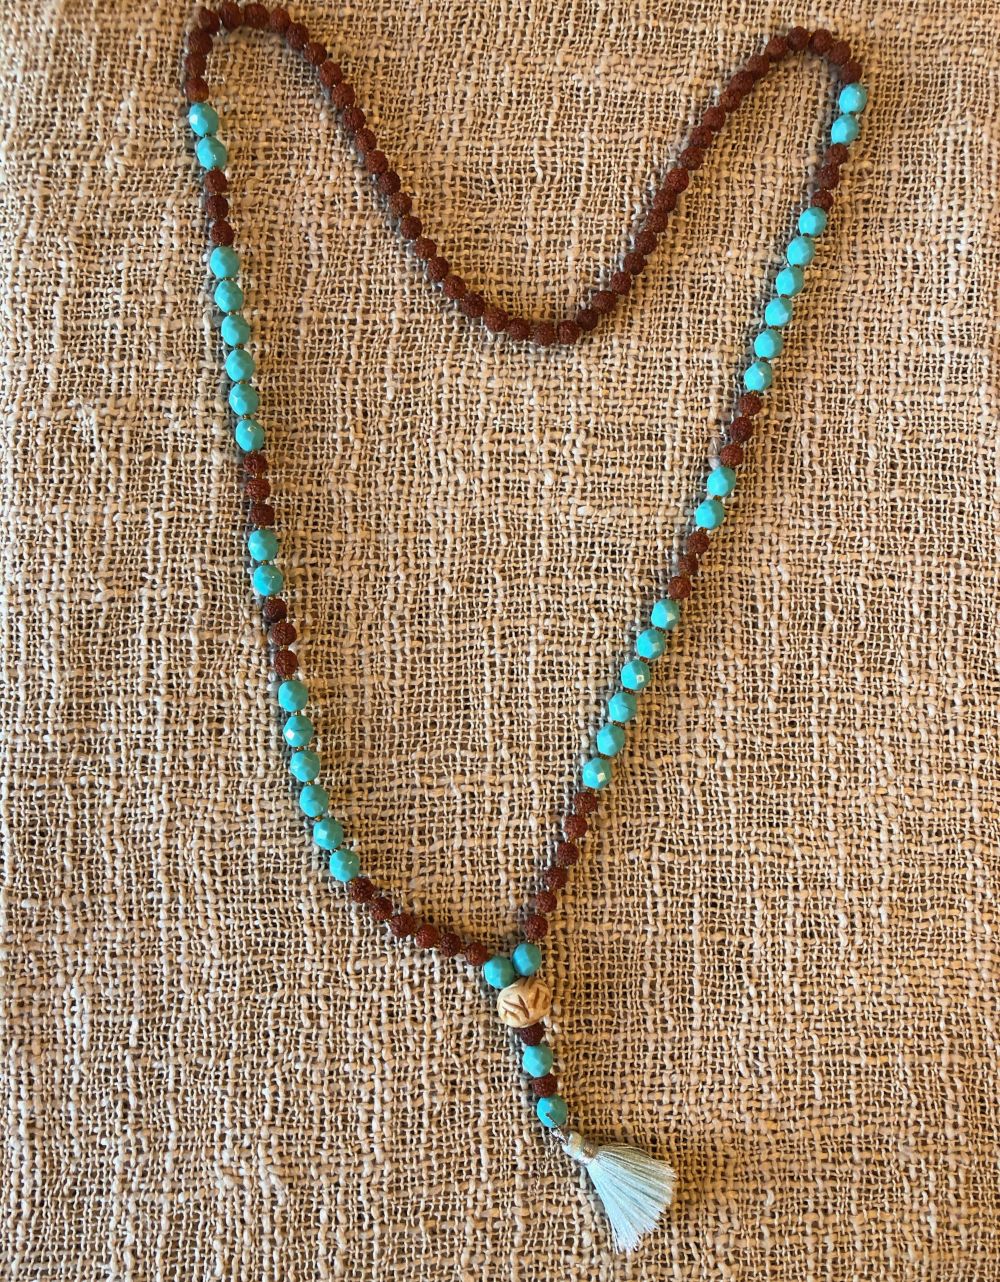 Jewelry Making Article - Mala Beads: How to Make Your Own Mala